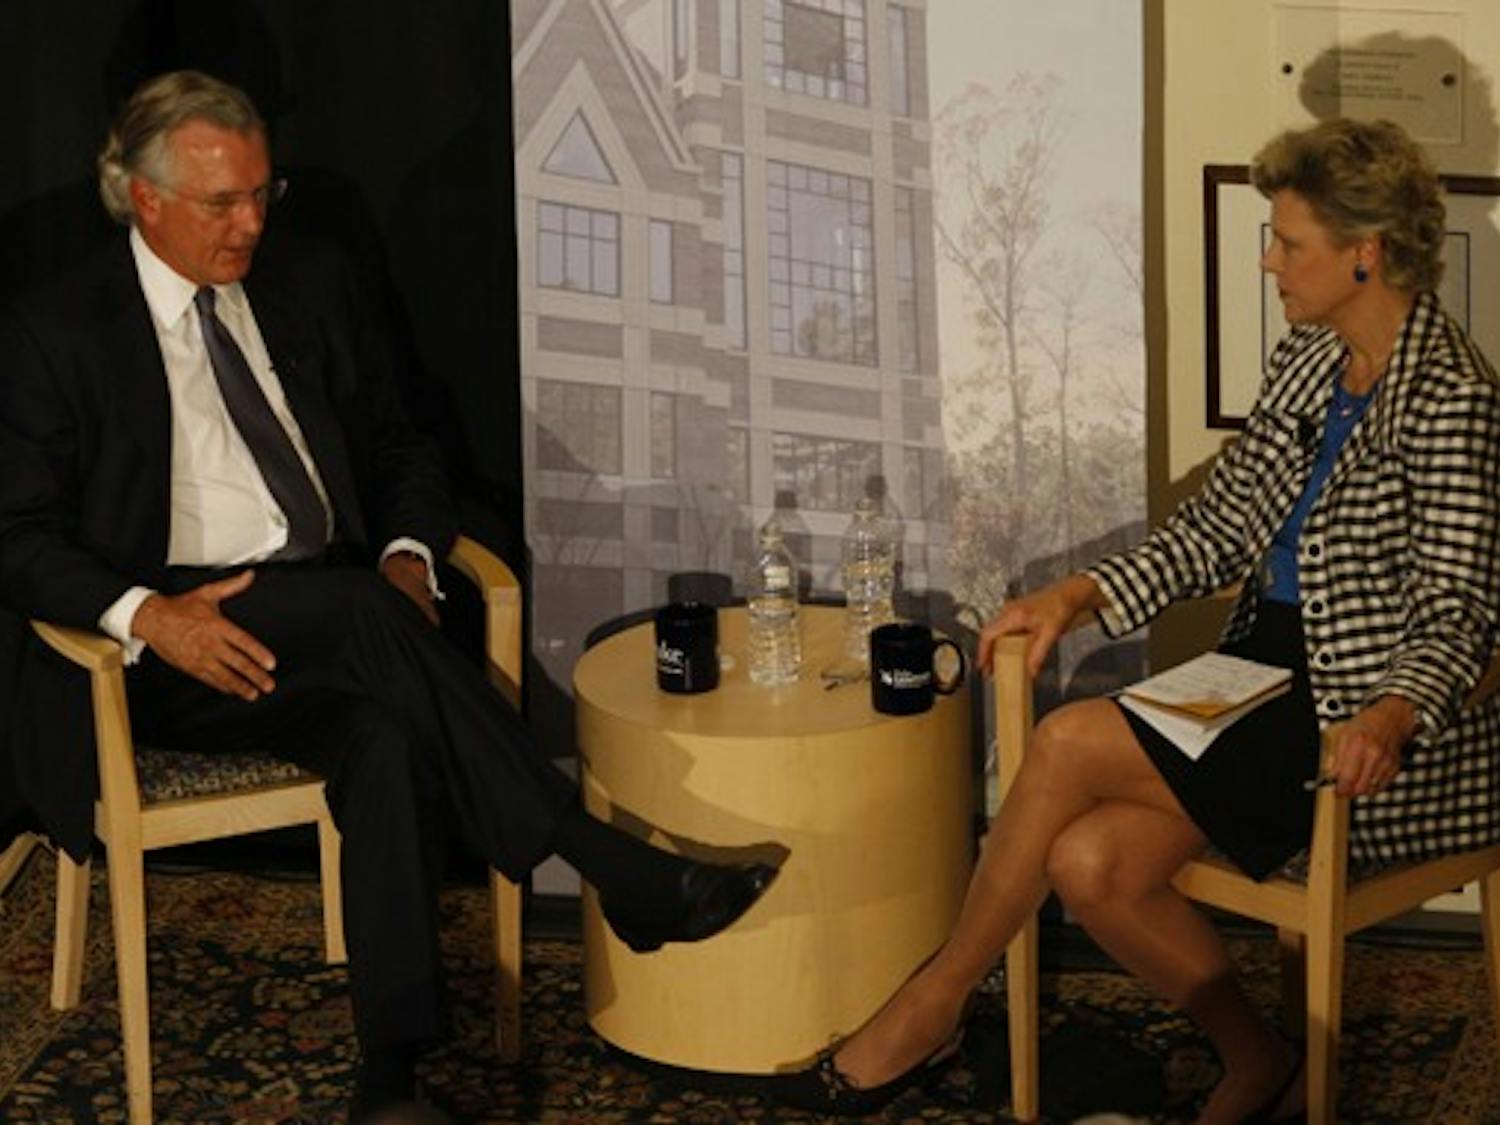 Cokie Roberts, news analyst for ABC news and NPR, led the question-and-answer session featuring Richard Fisher, chief executive officer of the Federal Reserve Bank of Dallas.